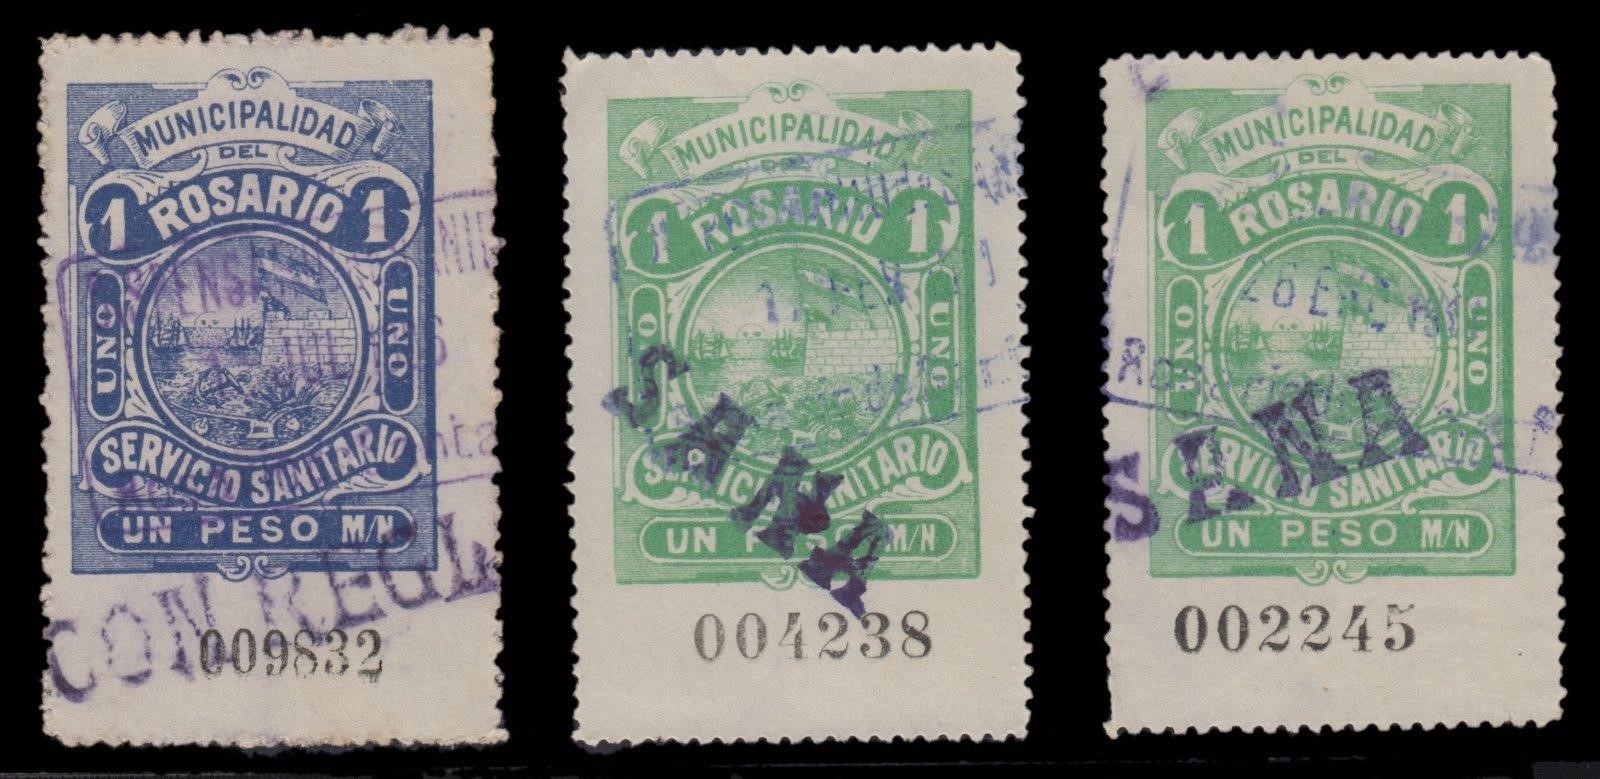 November 8th, 2020 weekly Stamps & Collectibles Auction